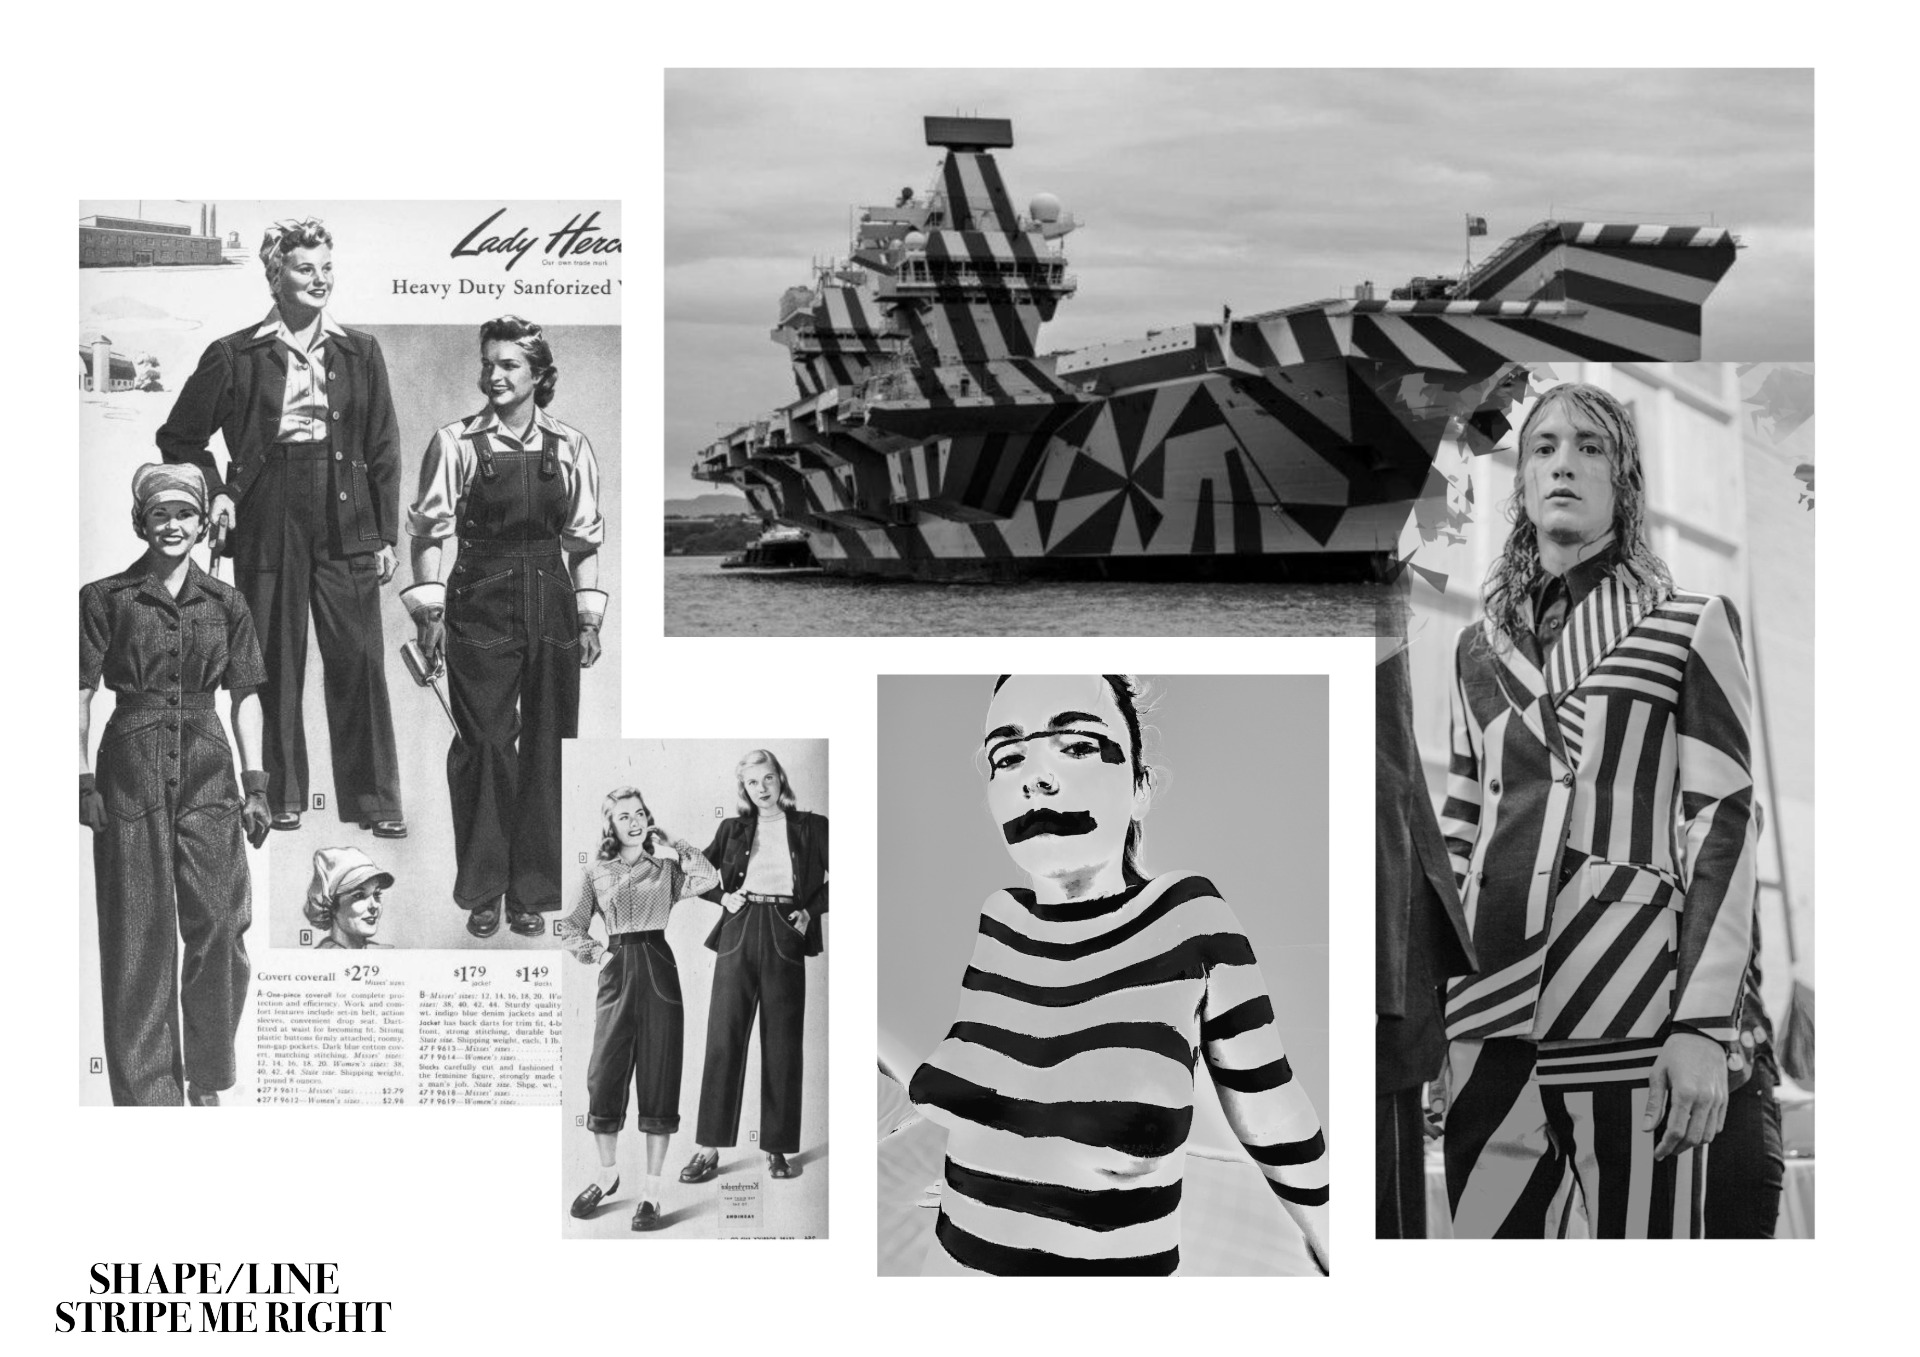 Photos of 1940s women's clothing designs and a striped aircraft carrier